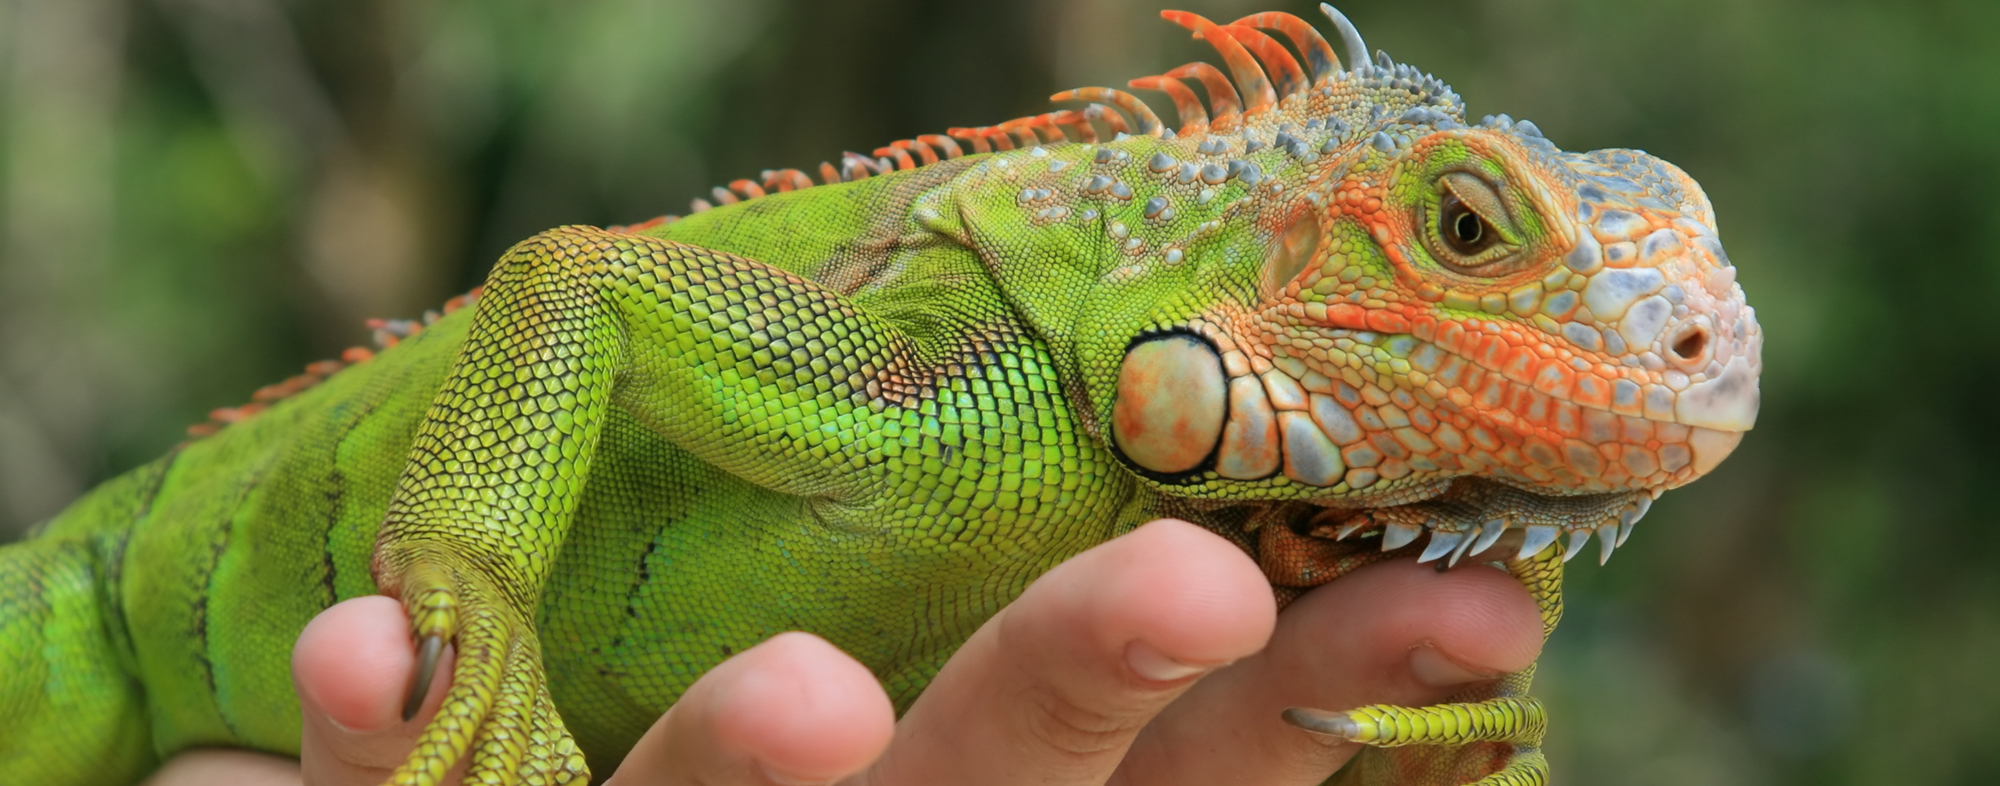 41 Best Images Best Reptile Pets For Handling - Reptiles Good For Handling | Keeping Exotic Pets